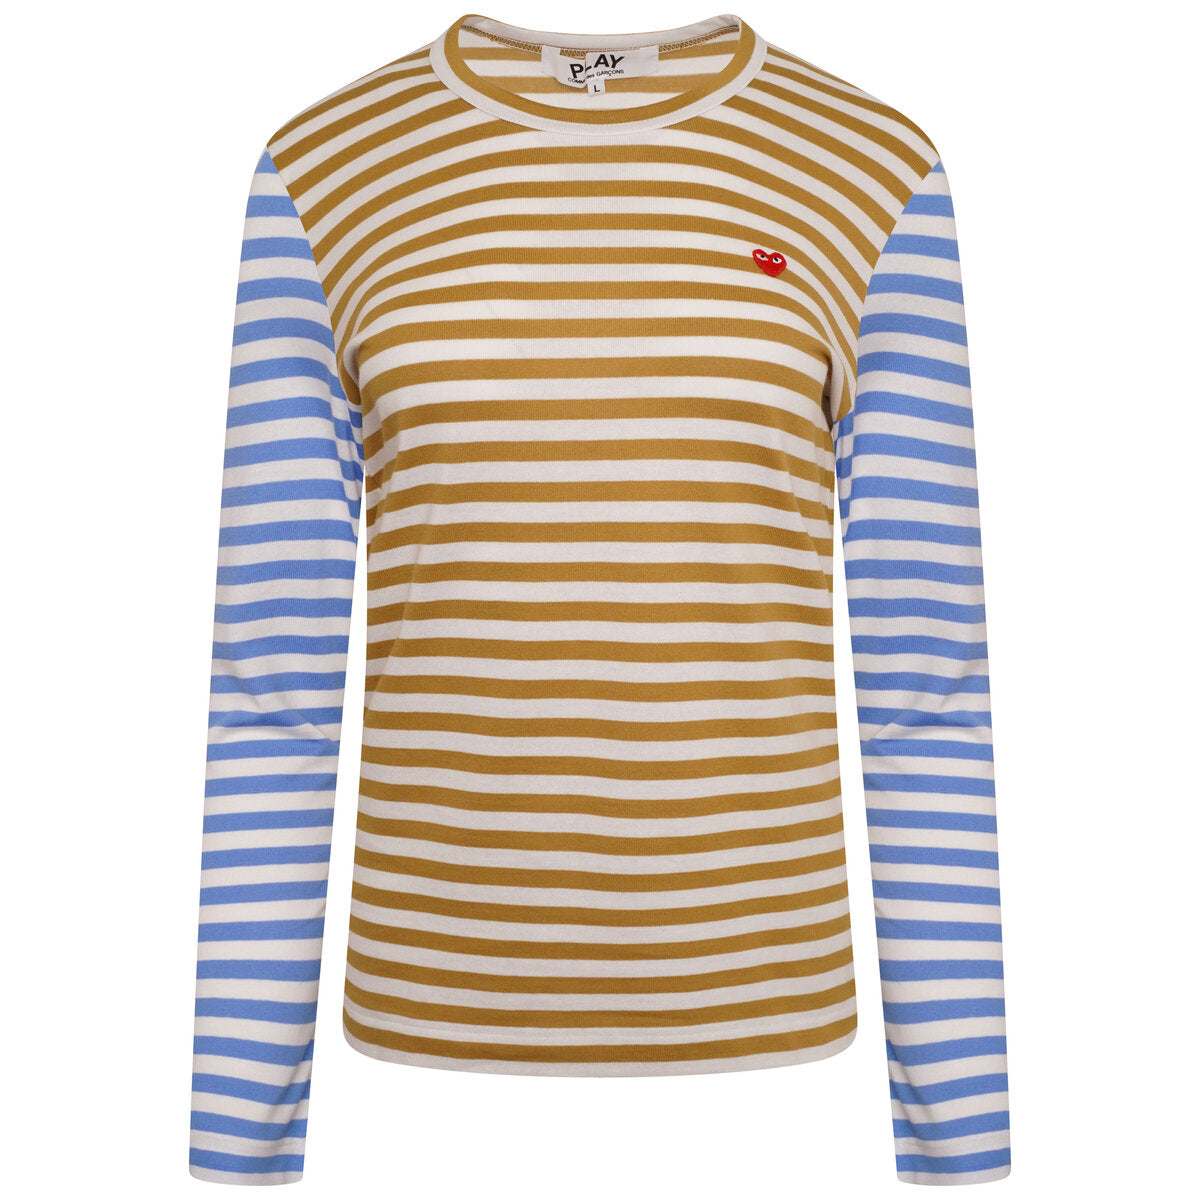 Striped Long Block Sleeve T-Shirt in olive/blue